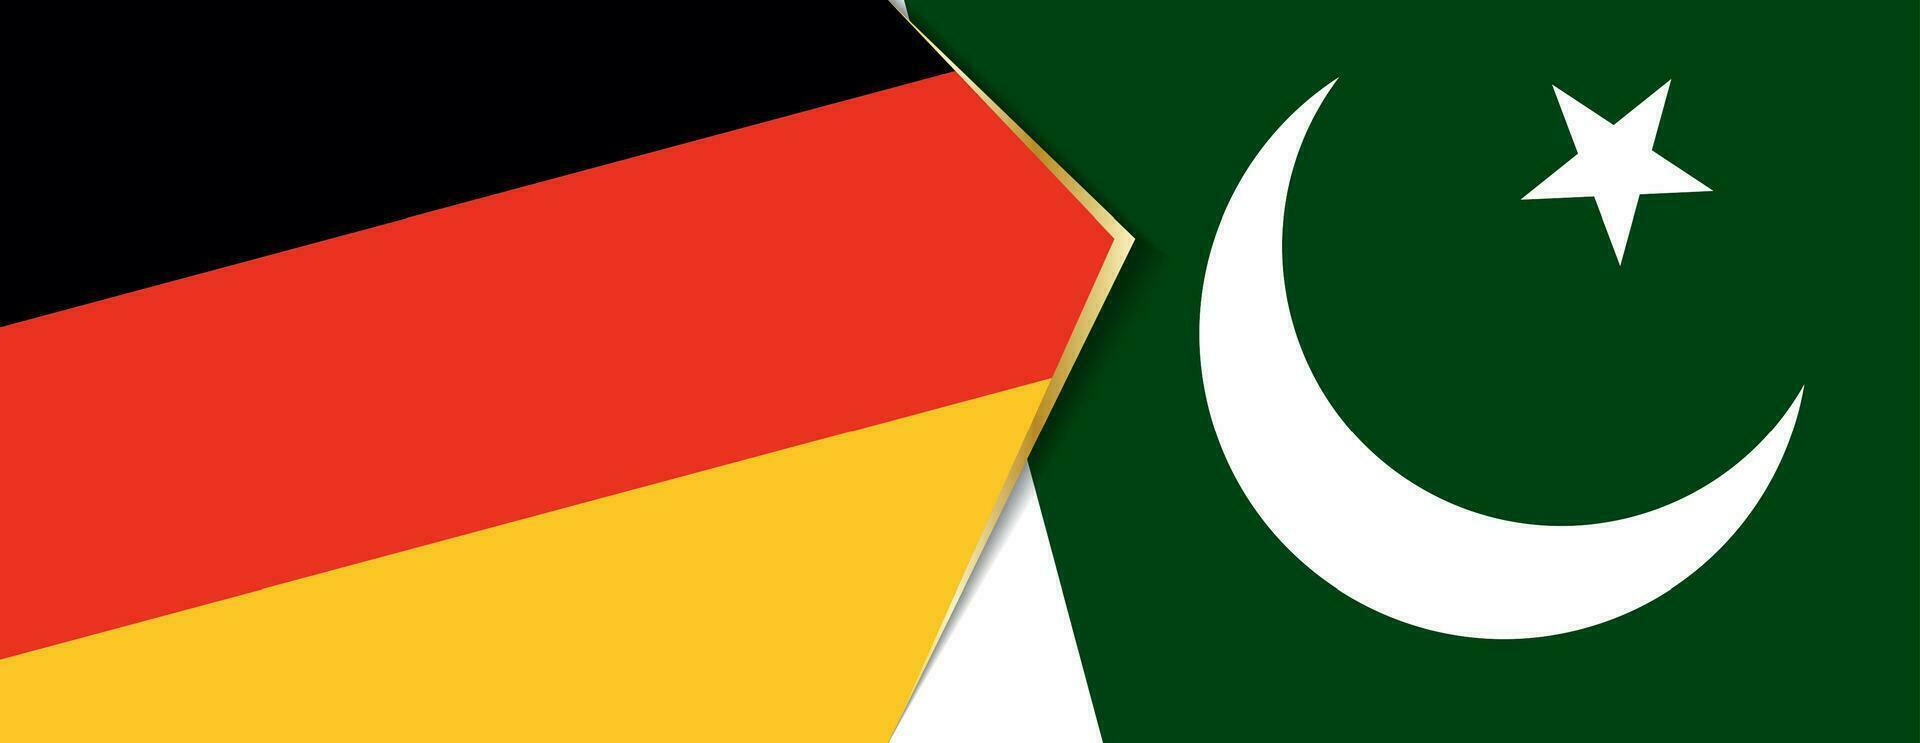 Germany and Pakistan flags, two vector flags.